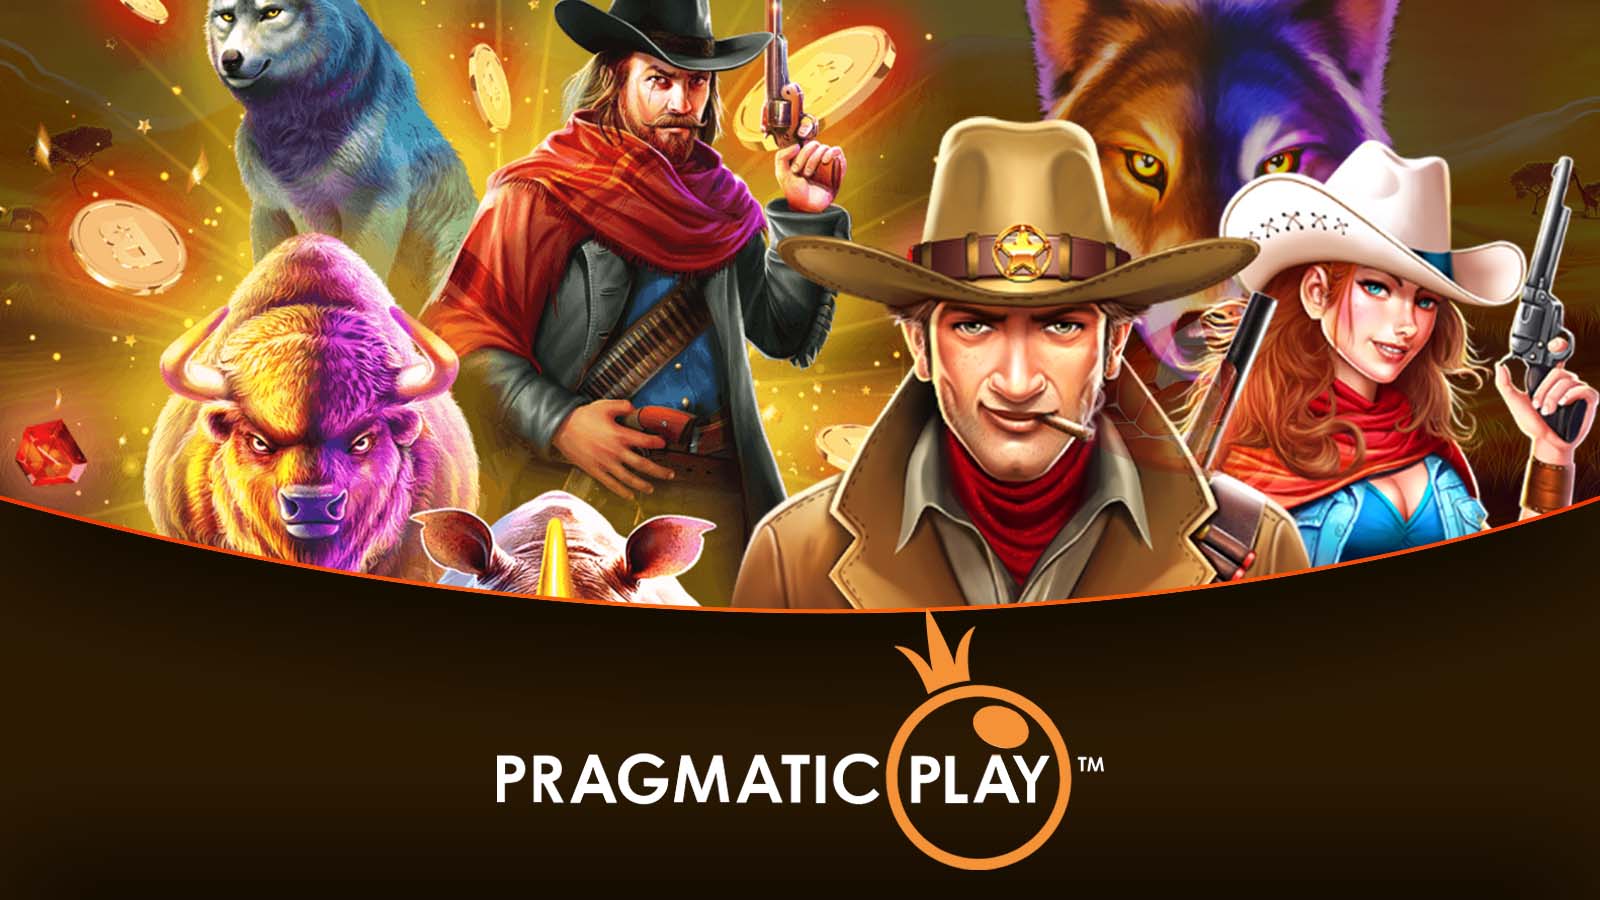 Pragmatic Play The Best Casino Game Provider for Players on a Budget